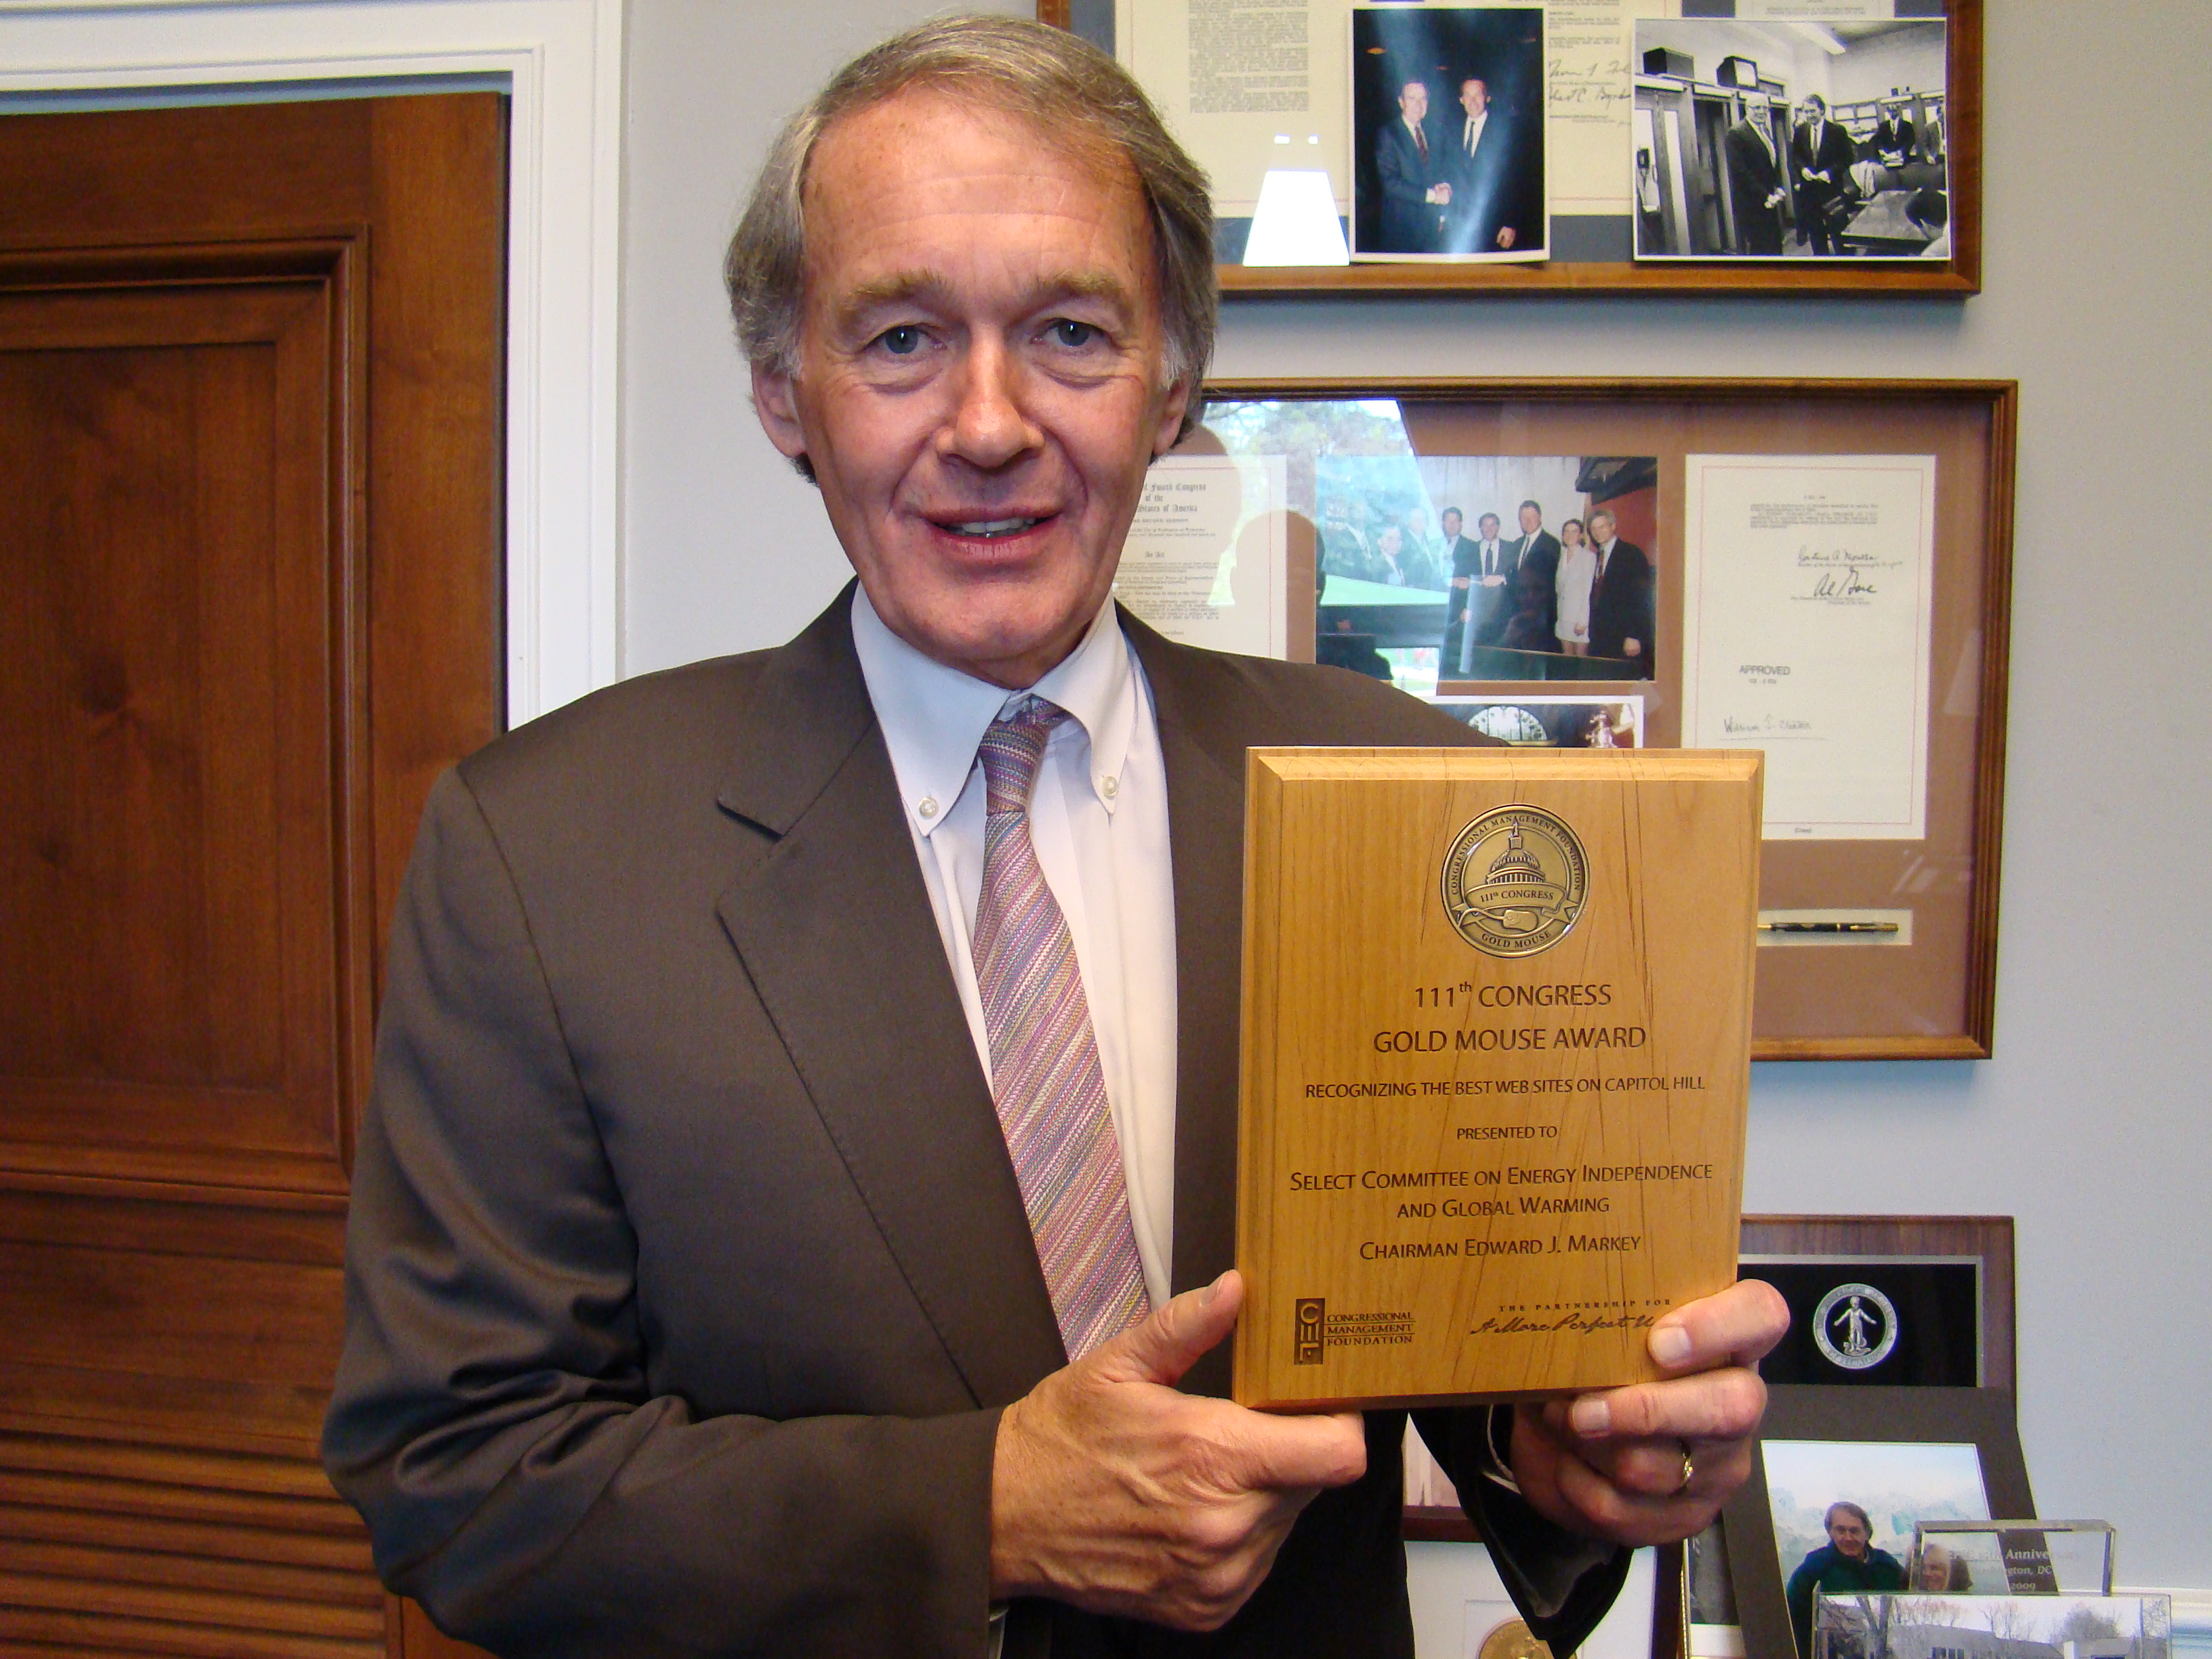 Chairman Markey and the Committee's award